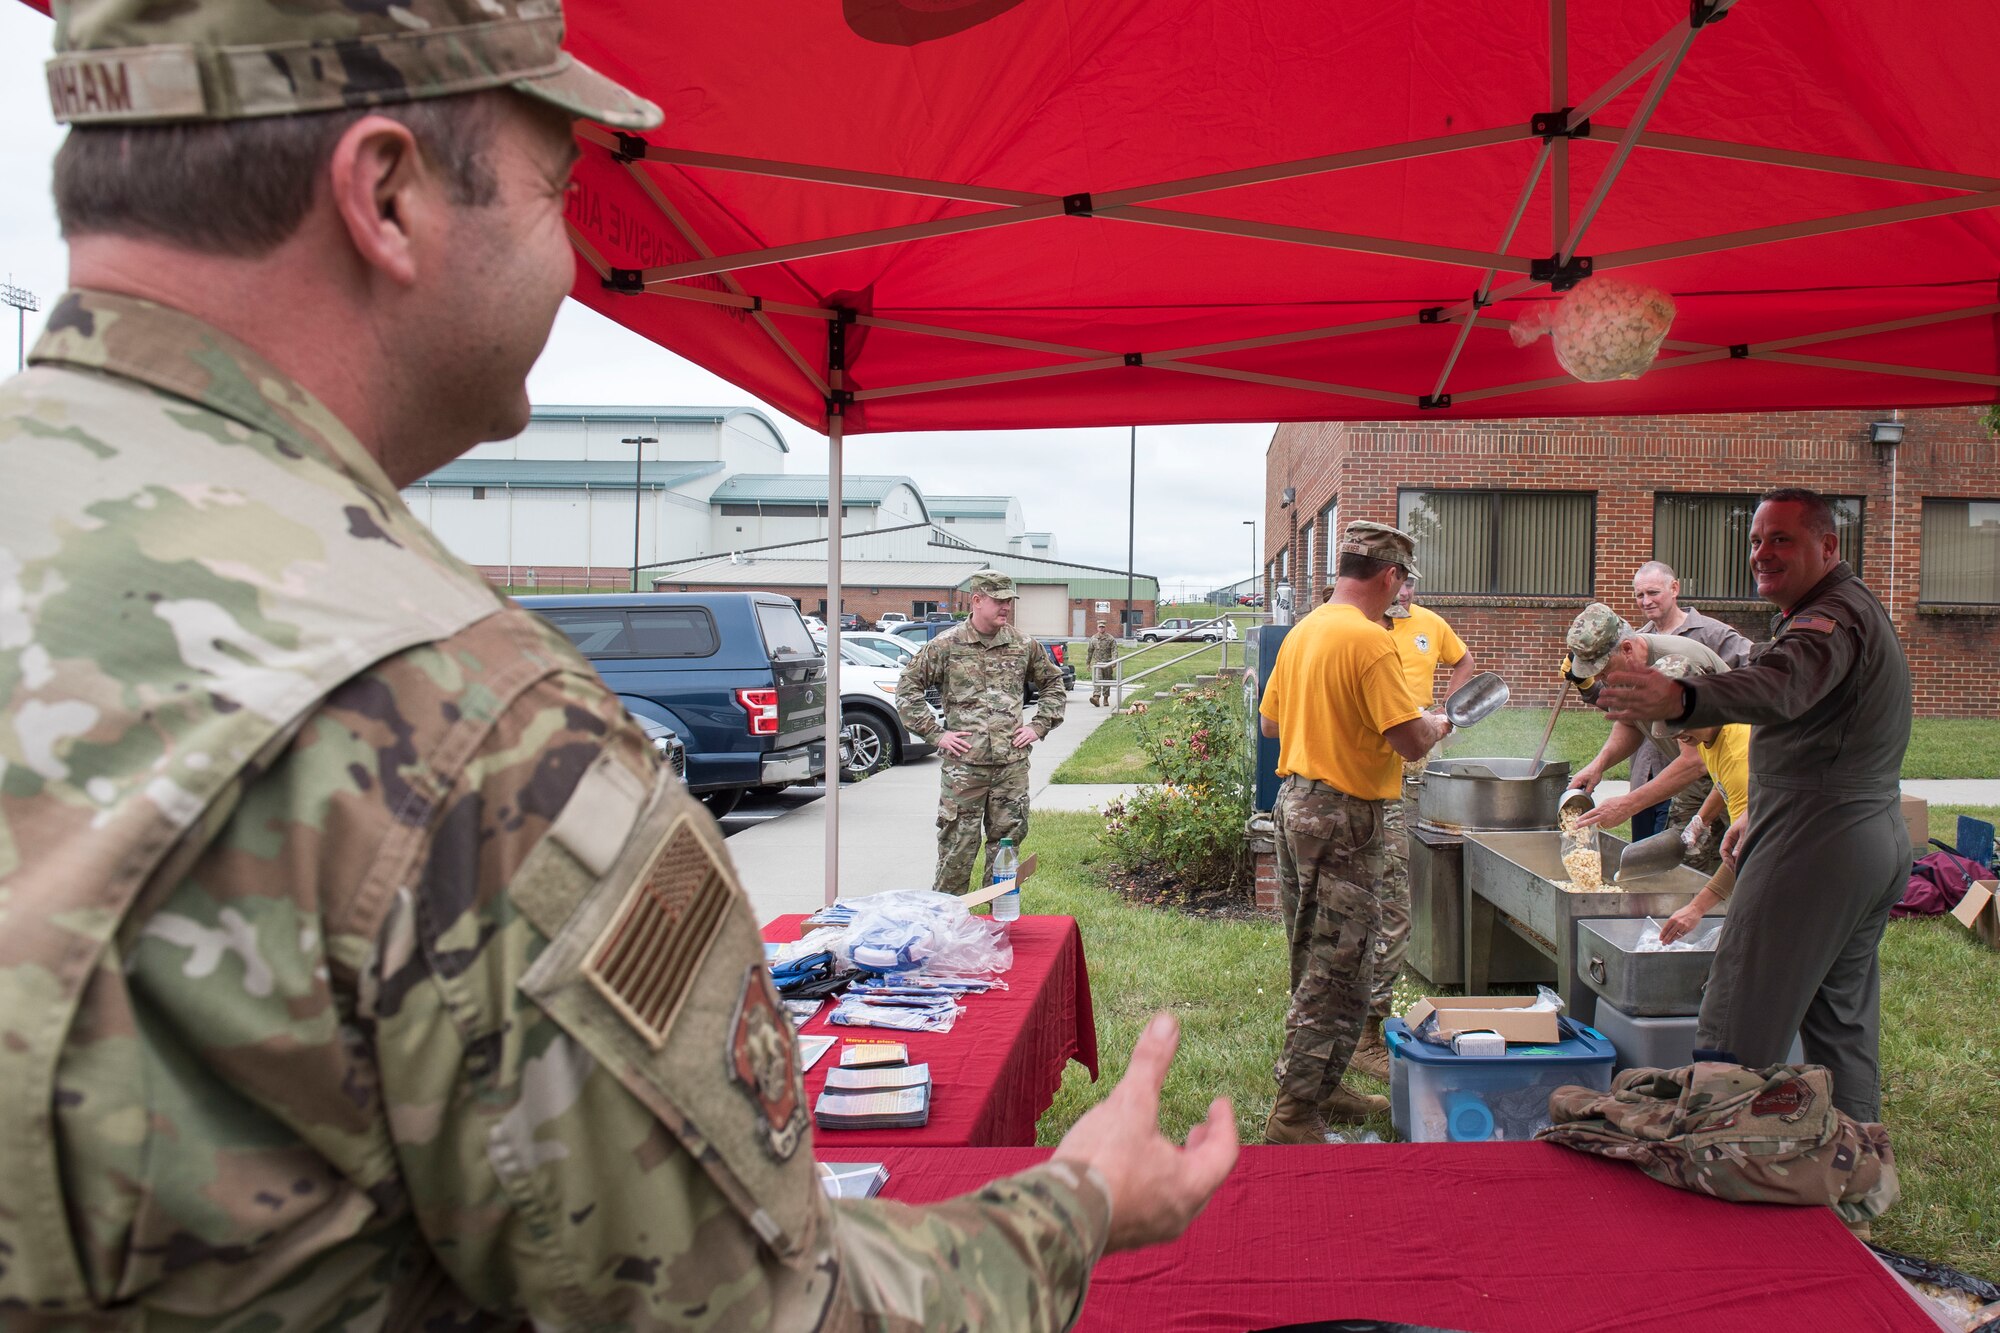 U.S. Air Force Chief Master Sgt. Mark Snyder, right, 167th Airlift Wing loadmaster, tosses a bag of kettle corn to Capt. Clinton Dunham, a 167th personnel officer assigned to the equal opportunity office, who was manning a wellness resources tent as part of the wing’s unit training assembly activities at Shepherd Field, Martinsburg, West Virginia, June 12, 2021. The 167th AW Chiefs’ Council prepared the kettle corn that was handed out by the Wing Care Team at a tent set up in front of the wing dining facility to help make Airmen aware of the wellness resources available to them.